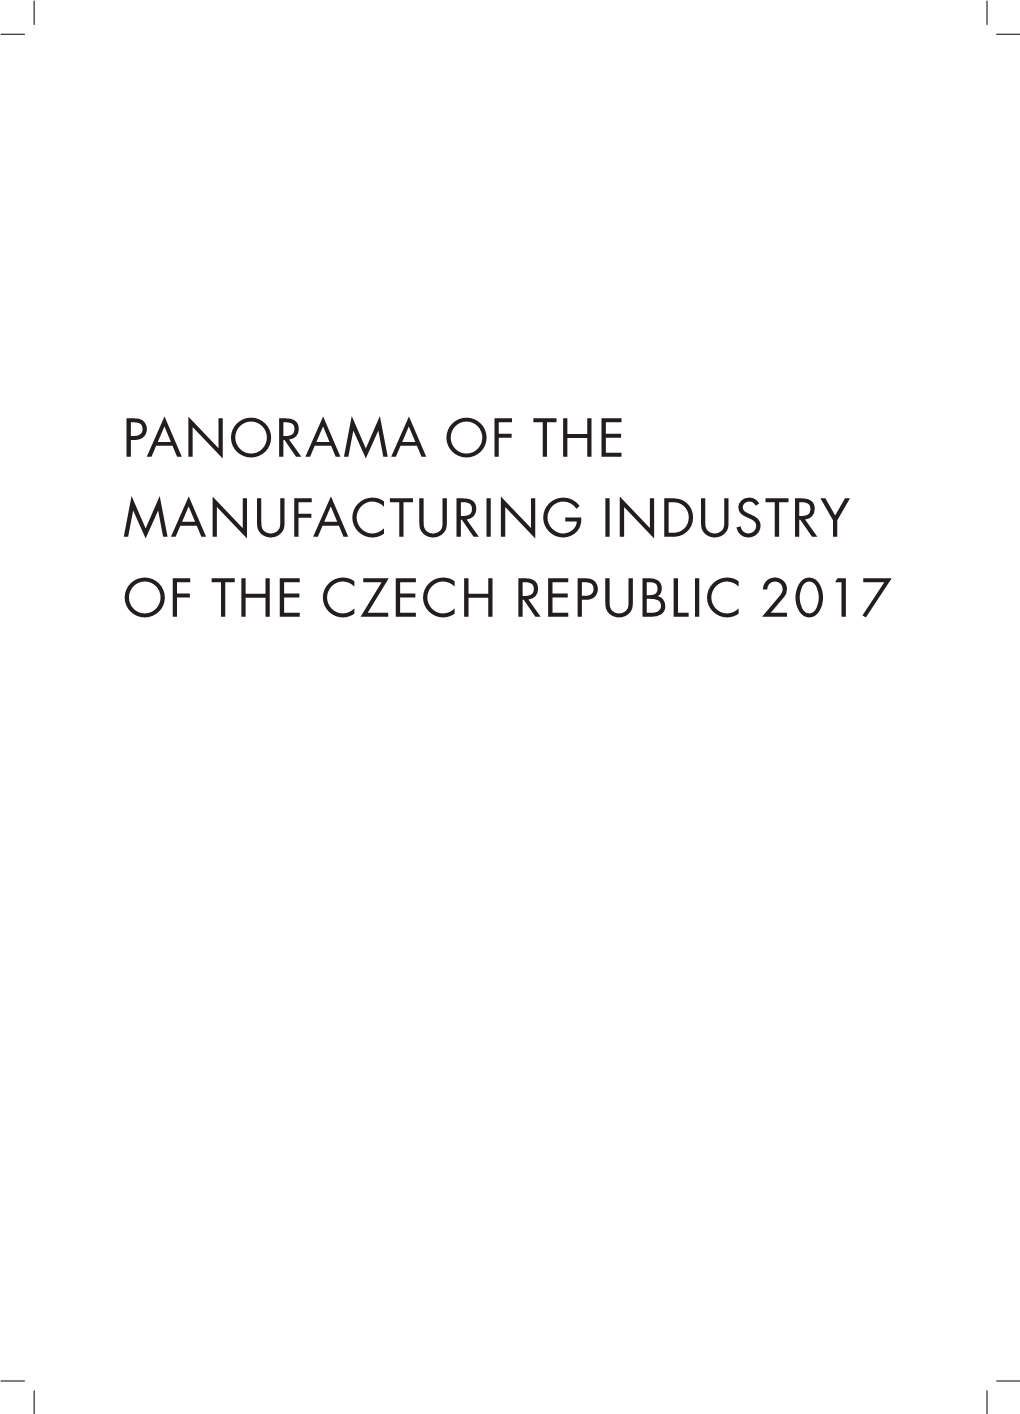 Panorama of the Manufacturing Industry of the Czech Republic 2017 Isbn 978-80-906942-5-5 Minister of Industry and Trade Introductory Note